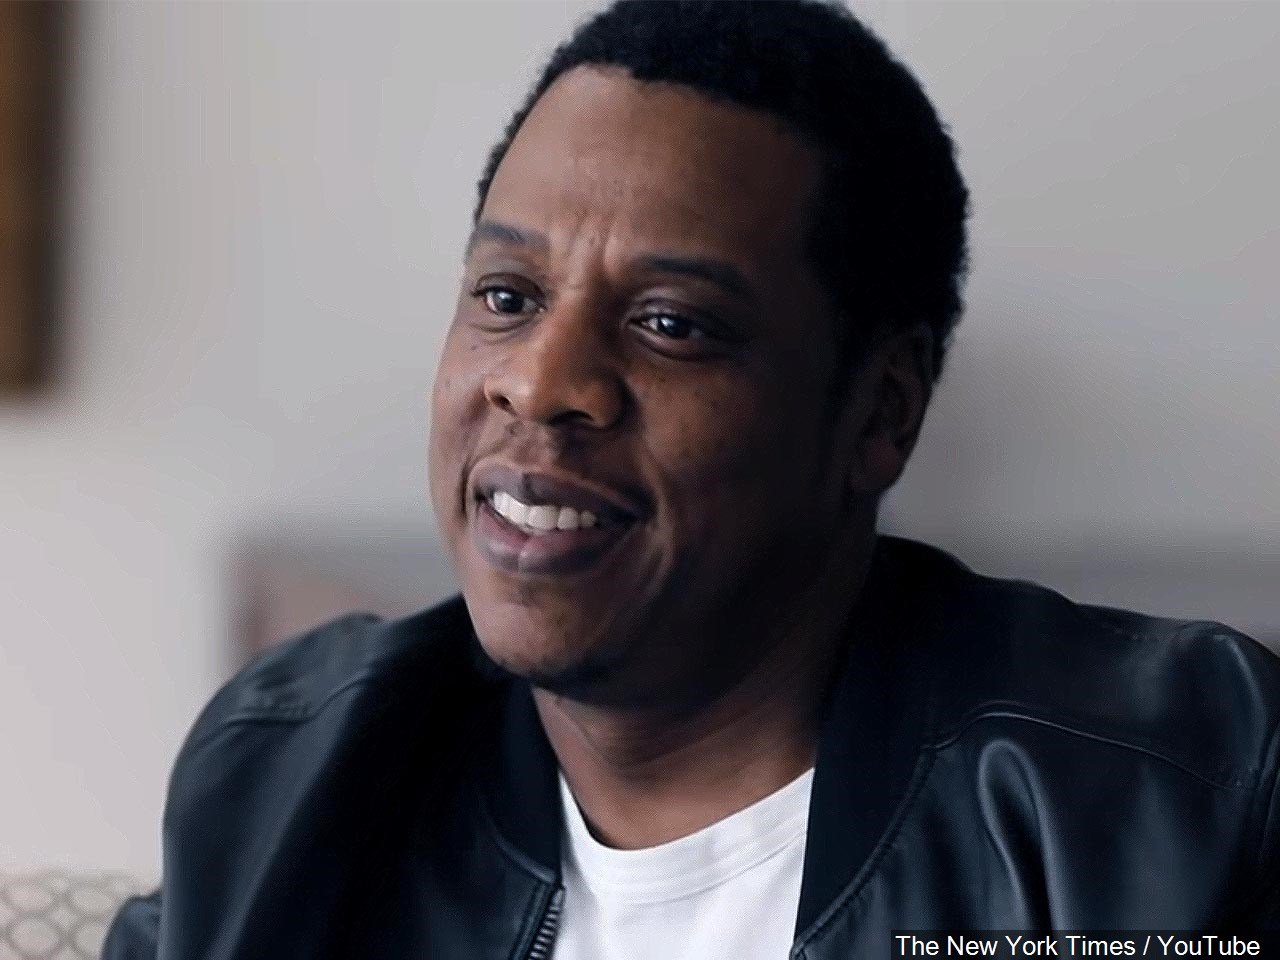 WATCH: Jay-Z sells 50% of Ace of Spades champagne brand to Moet Hennessy